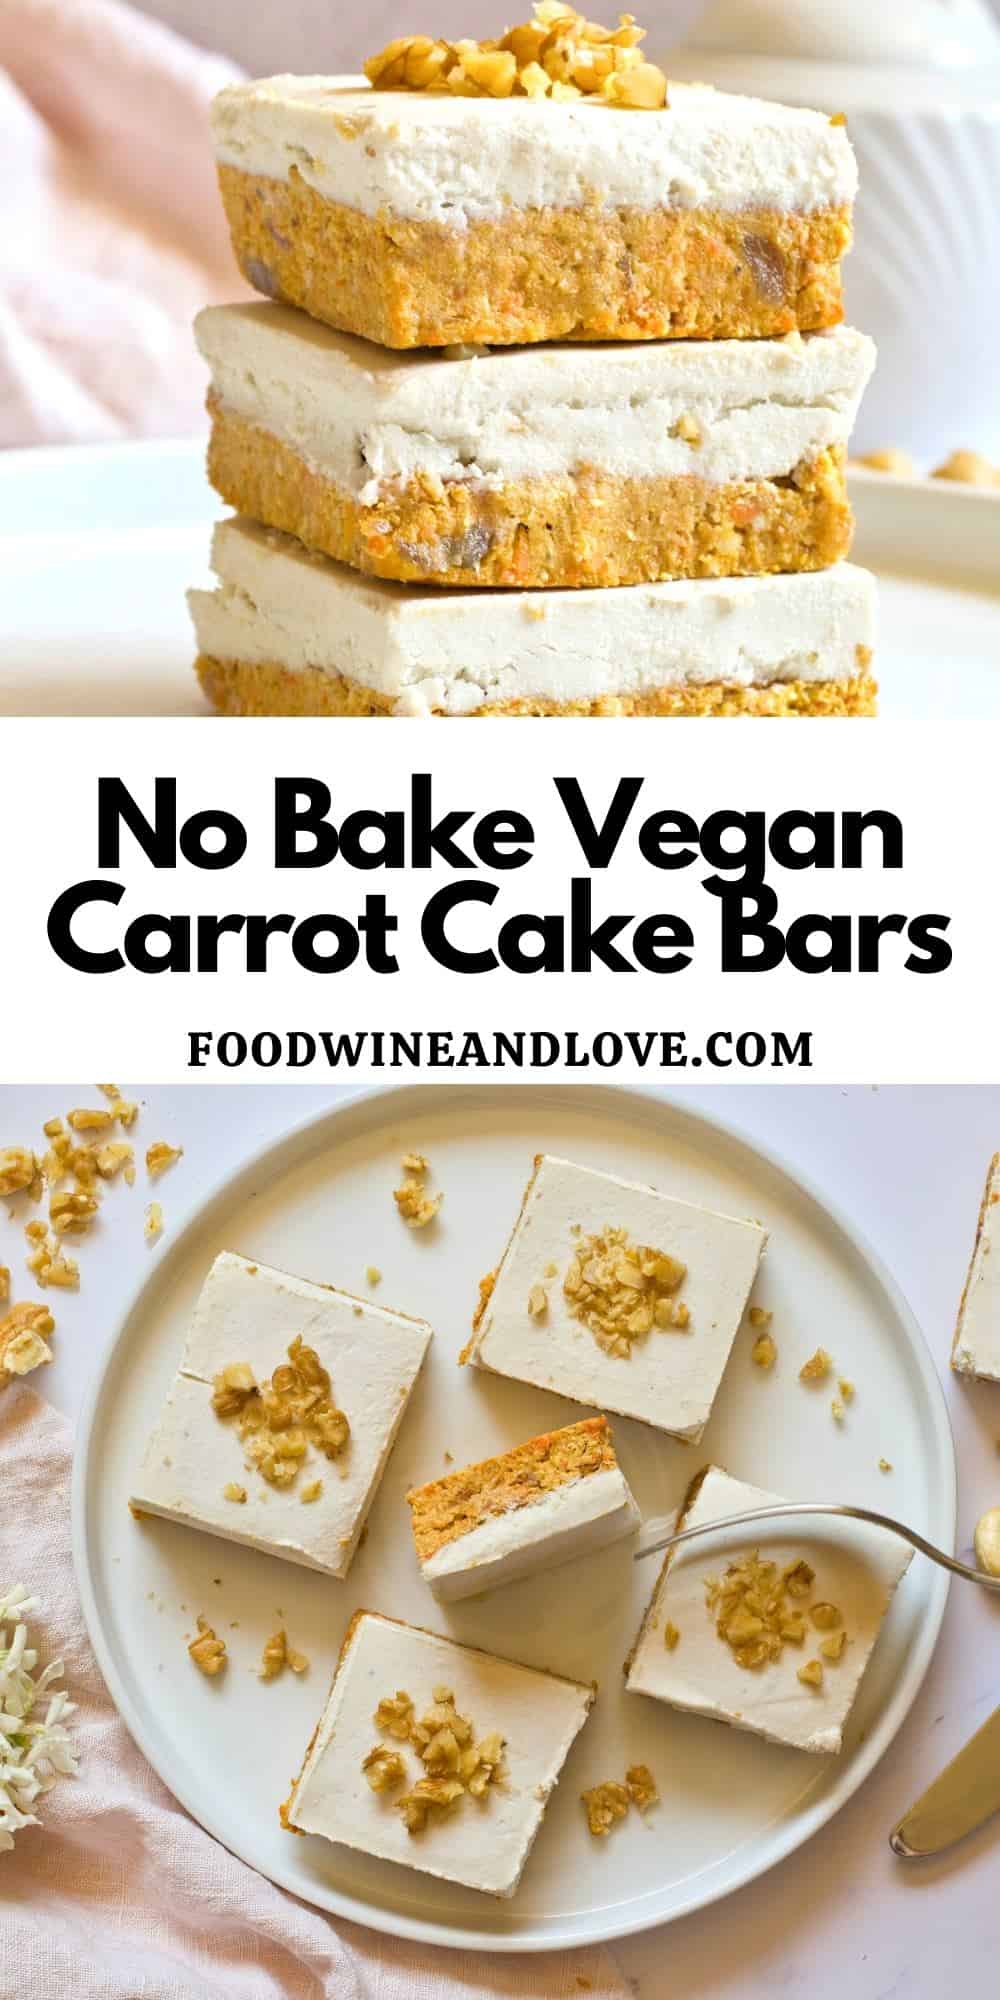 No Bake Vegan Carrot Cake Bars,  delicious and simple frosted dessert recipe made with almond flour and sweetened with dates. 